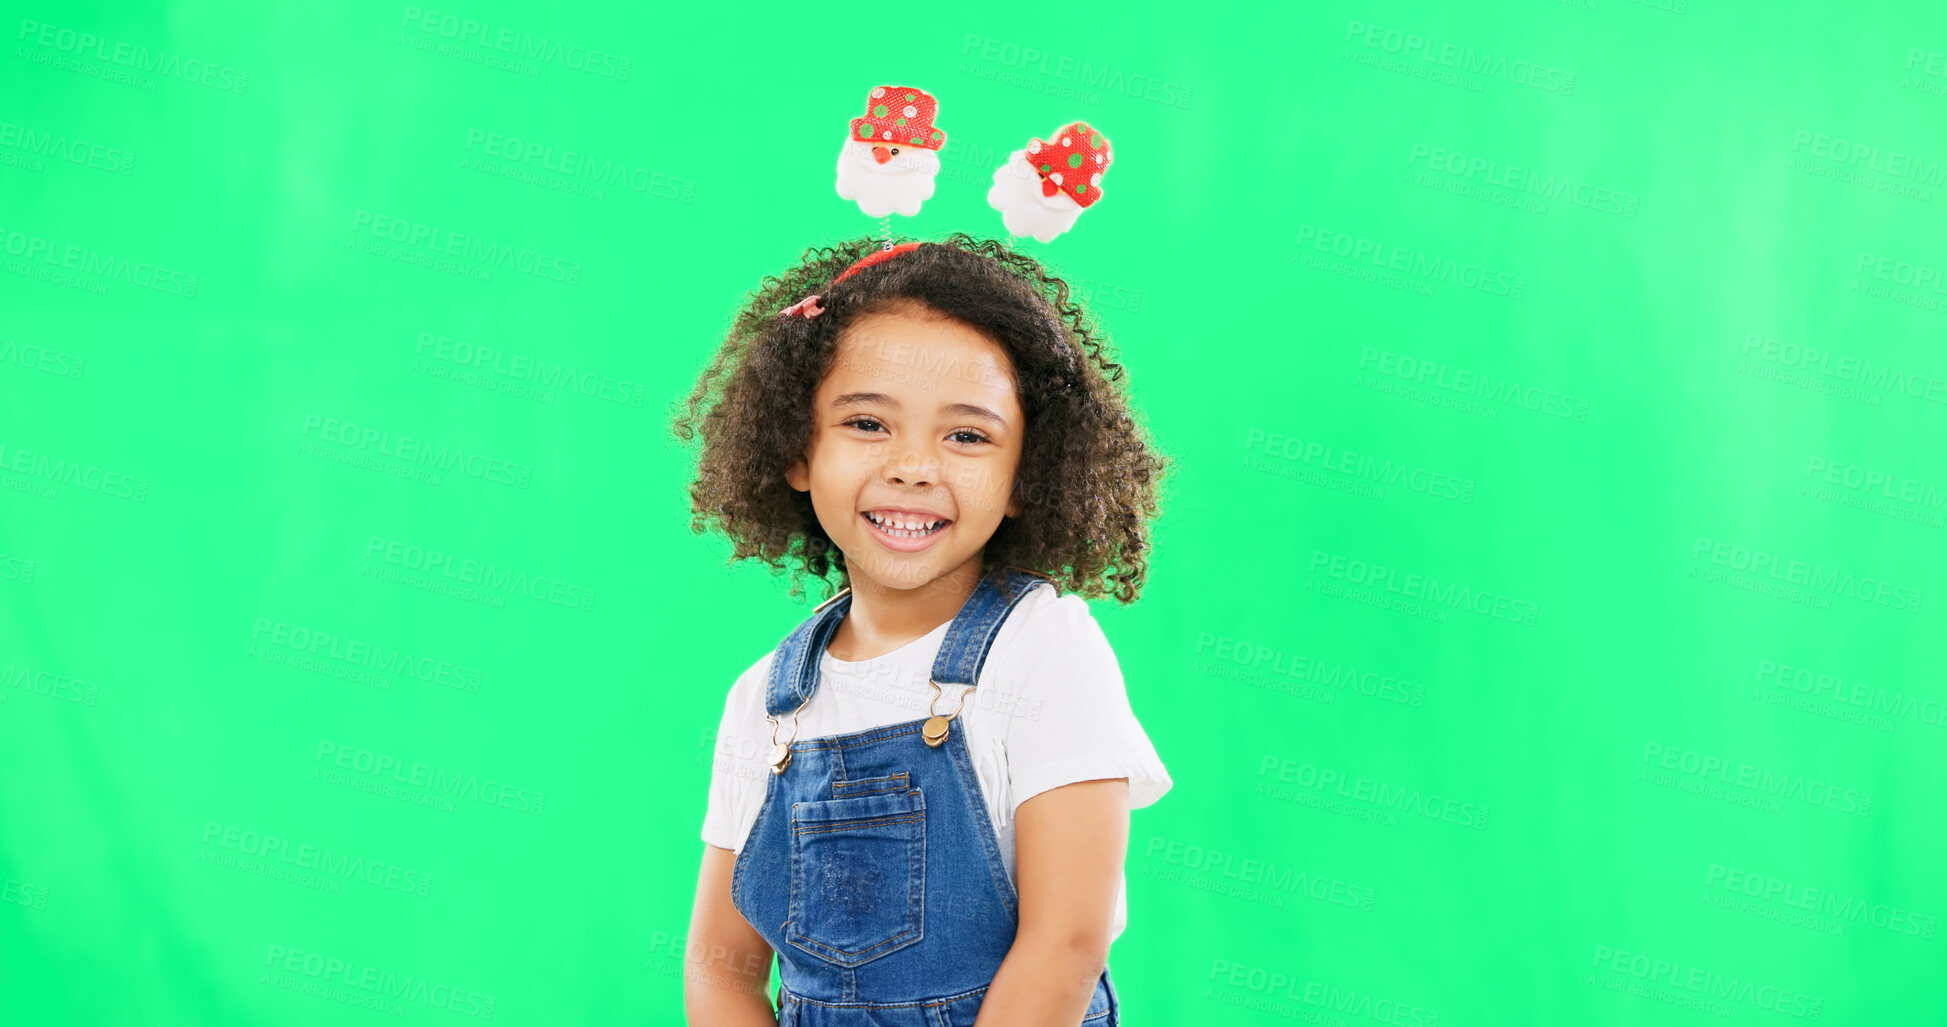 Buy stock photo Green screen, happy and portrait of child with headband for holiday, vacation and celebration. Christmas decoration, joy and face of young girl smile on chromakey studio background for festival